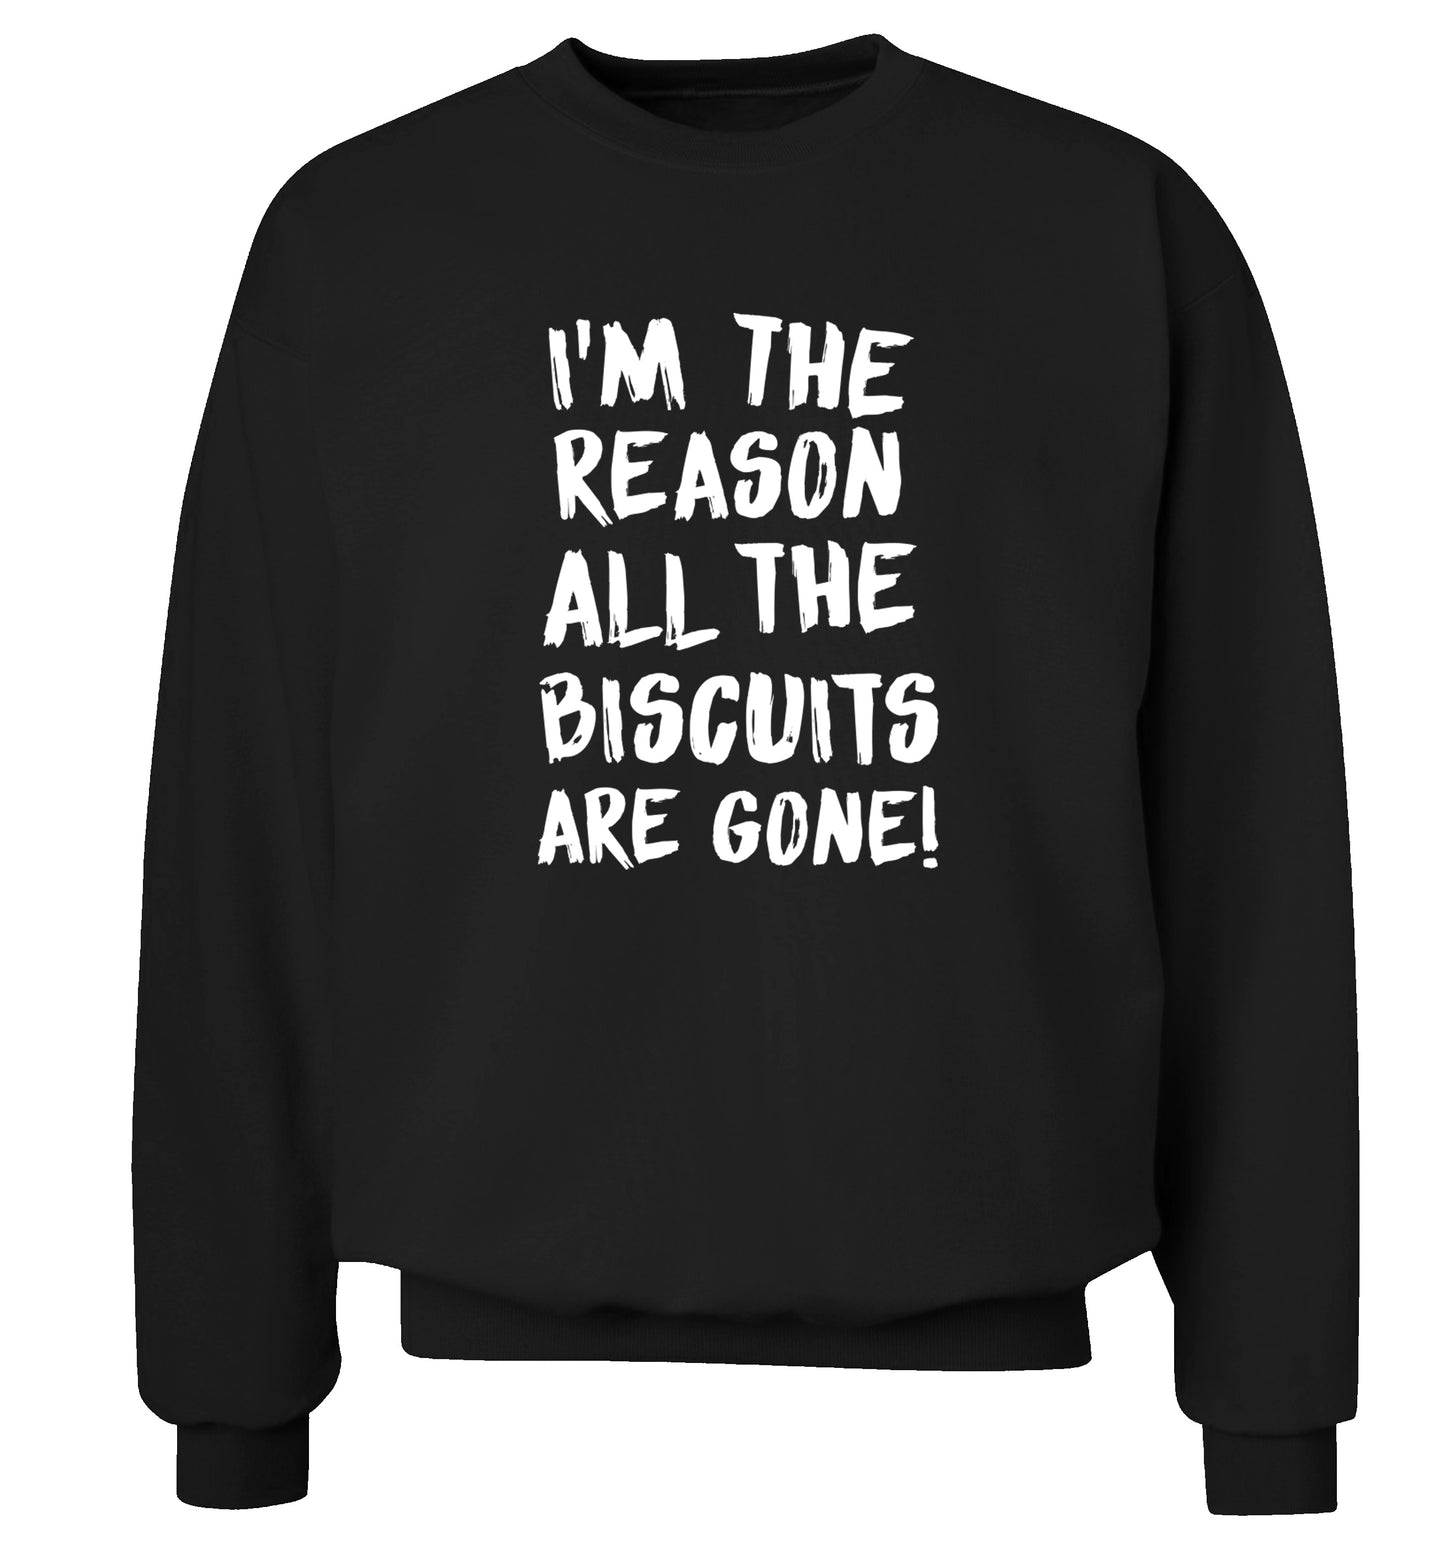 I'm the reason why all the biscuits are gone Adult's unisex black Sweater 2XL